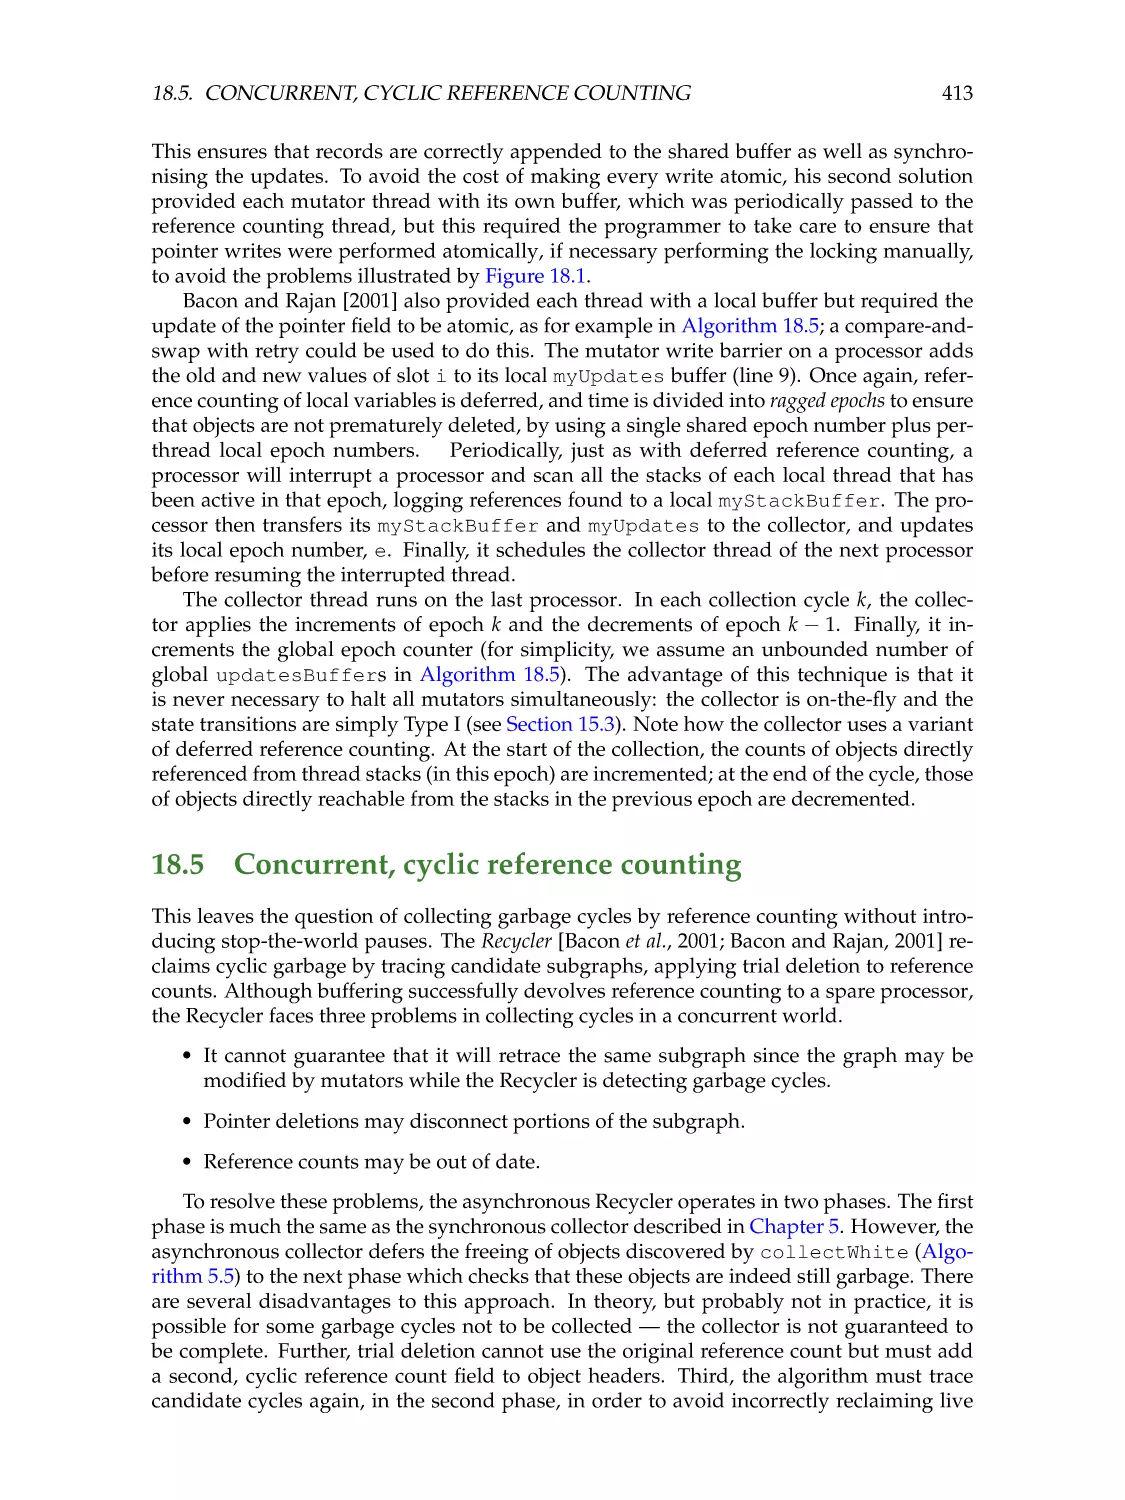 18.5. Concurrent, cyclic reference counting